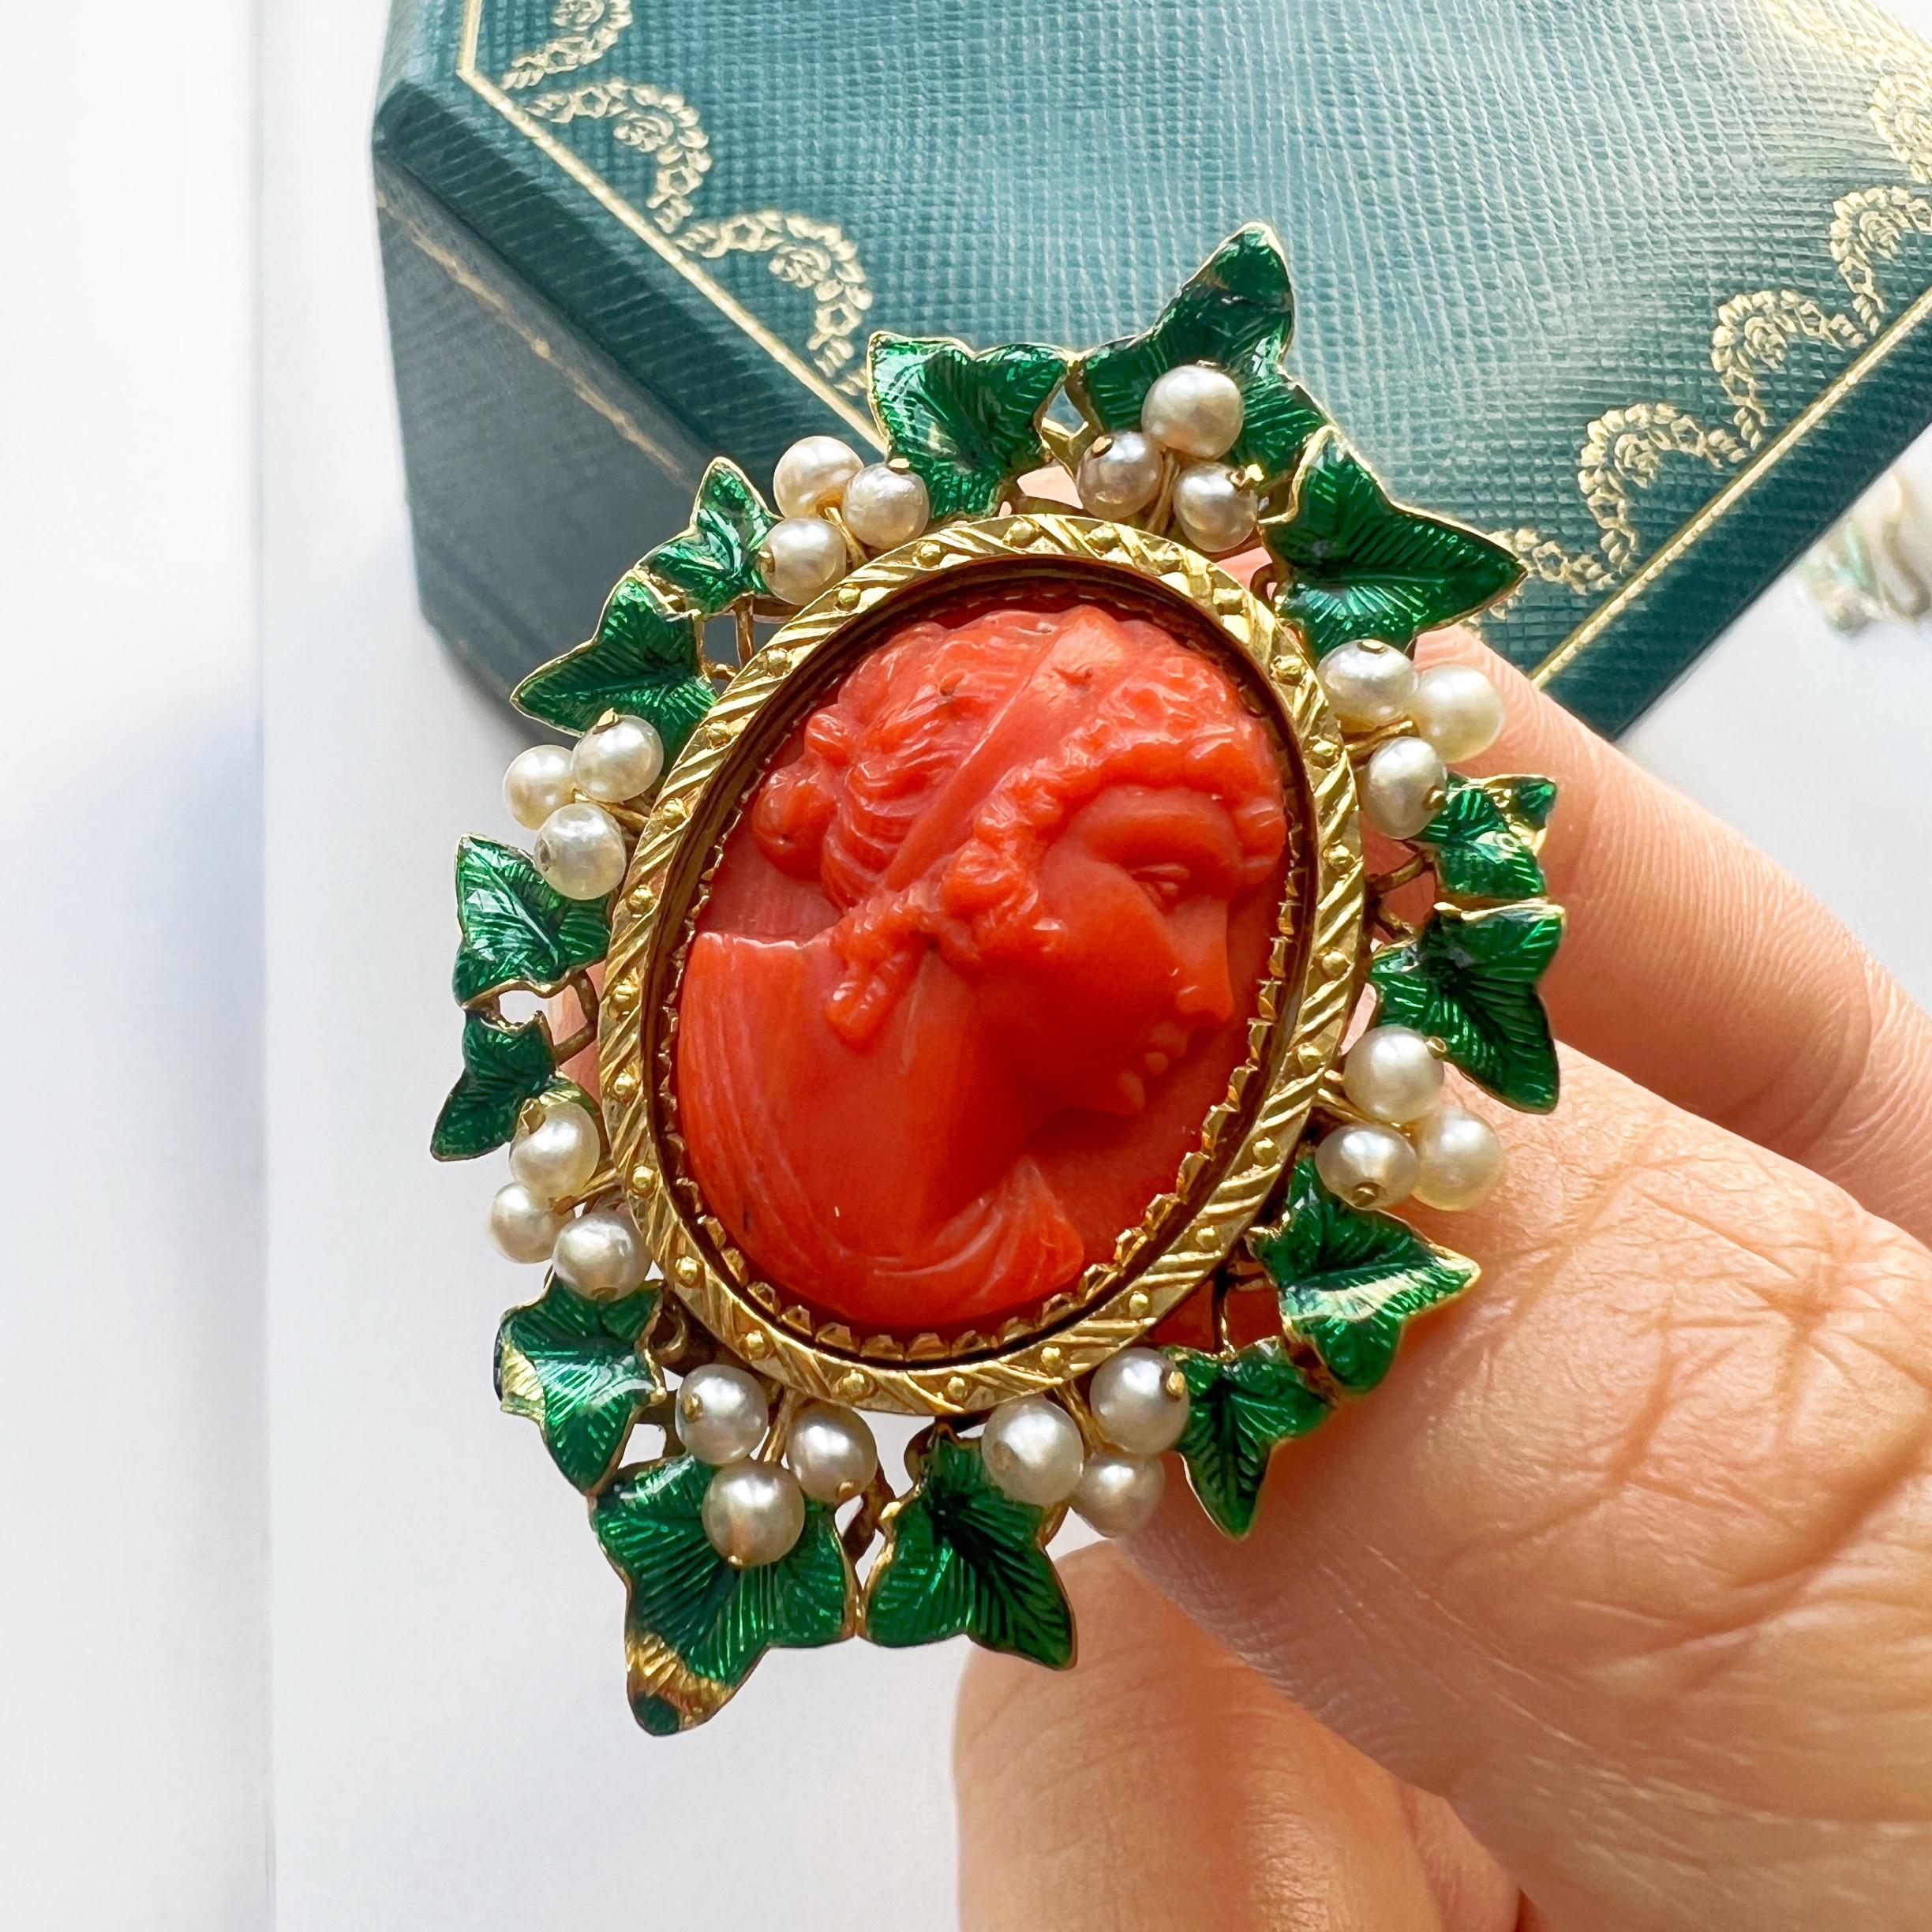 High Victorian Victorian 18K gold coral cameo brooch with ivy leaves and natural seed pearls